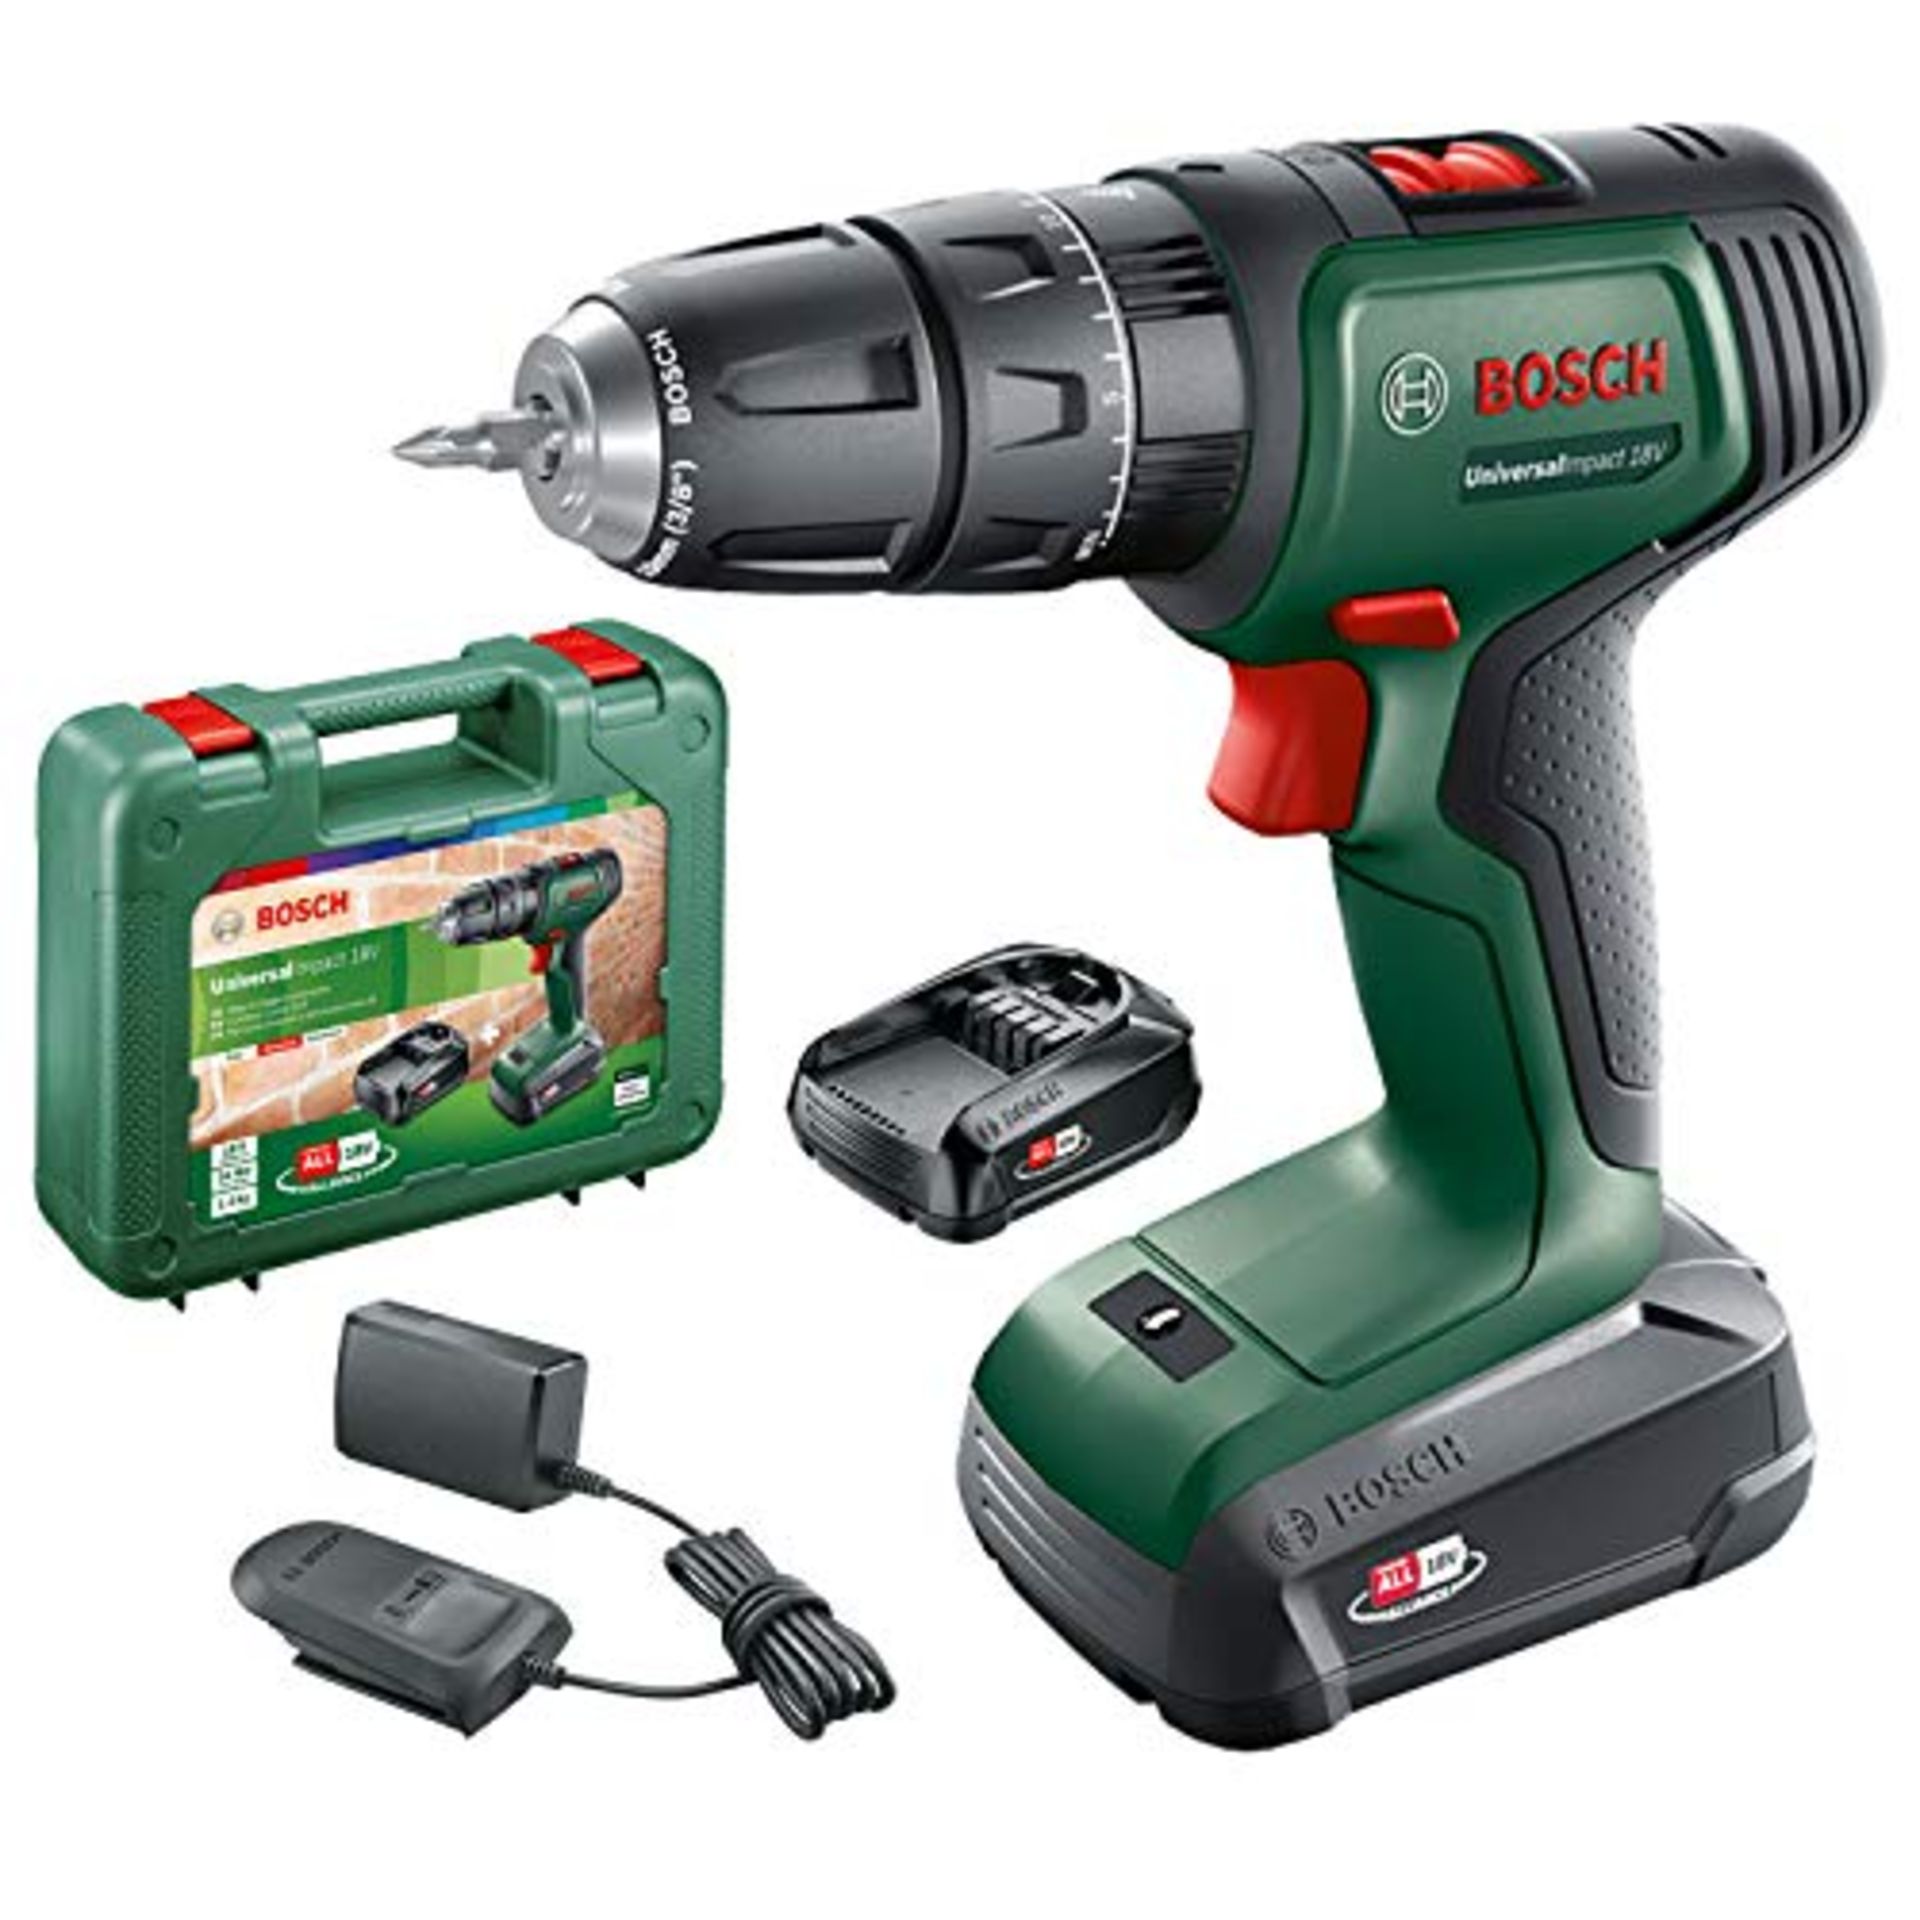 RRP £80.00 Bosch Home and Garden Cordless Combi Drill UniversalImpact 18V, 20 torque settings, ma